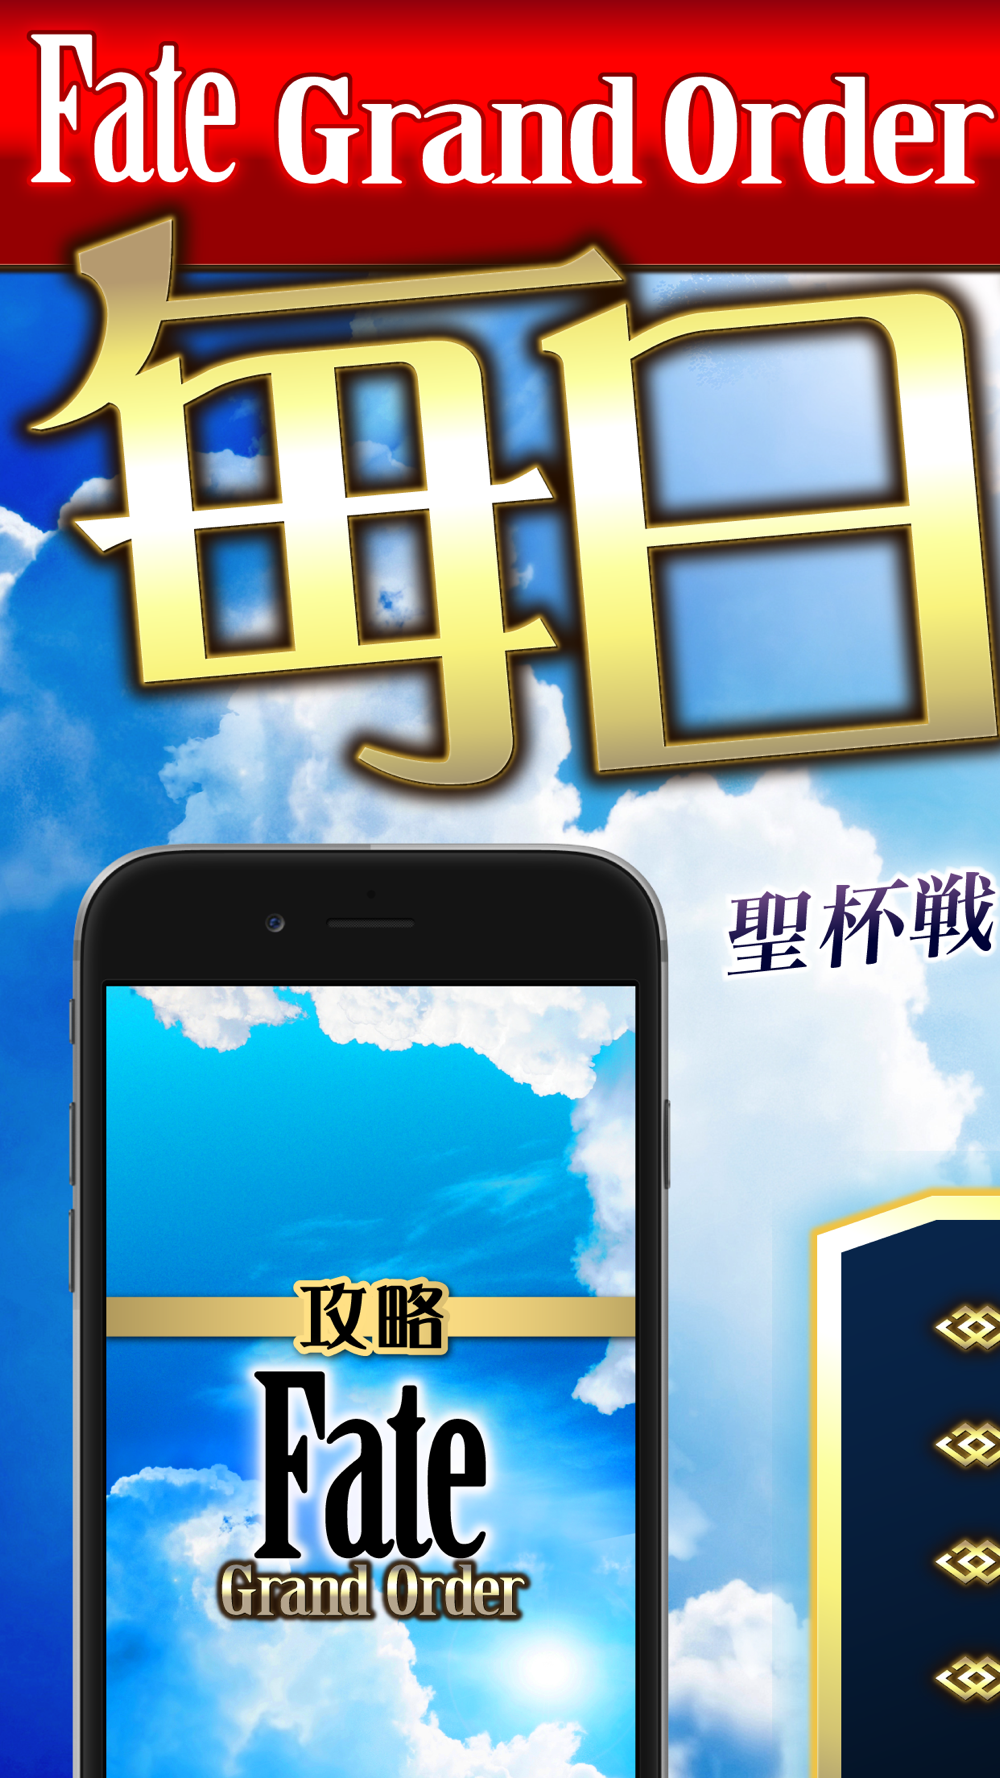 Fgo攻略 ニュースまとめアプリ For Fate Grand Order Free Download App For Iphone Steprimo Com